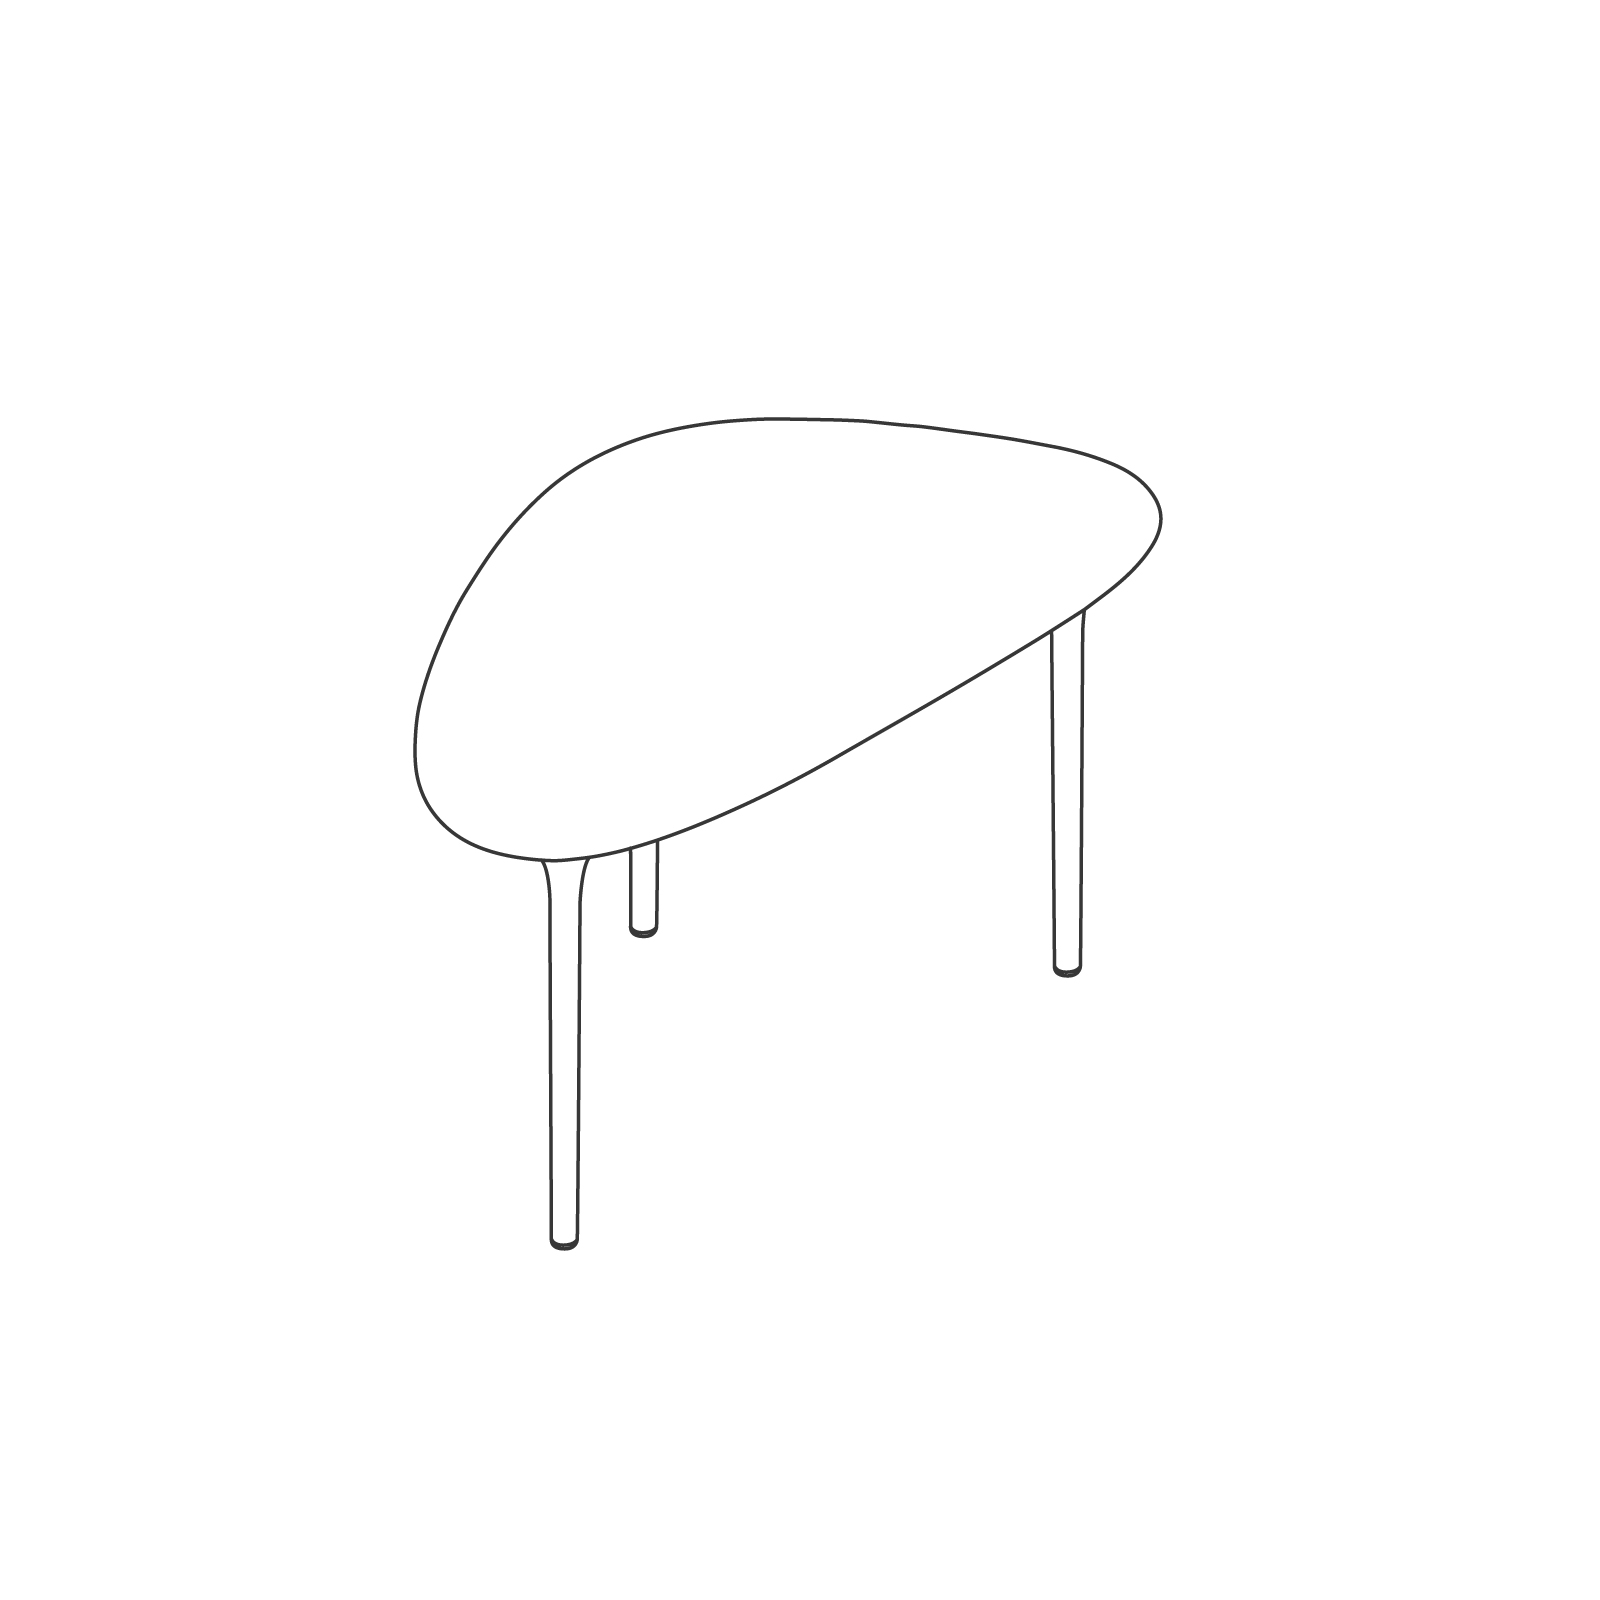 A line drawing - Cyclade Table – Tall